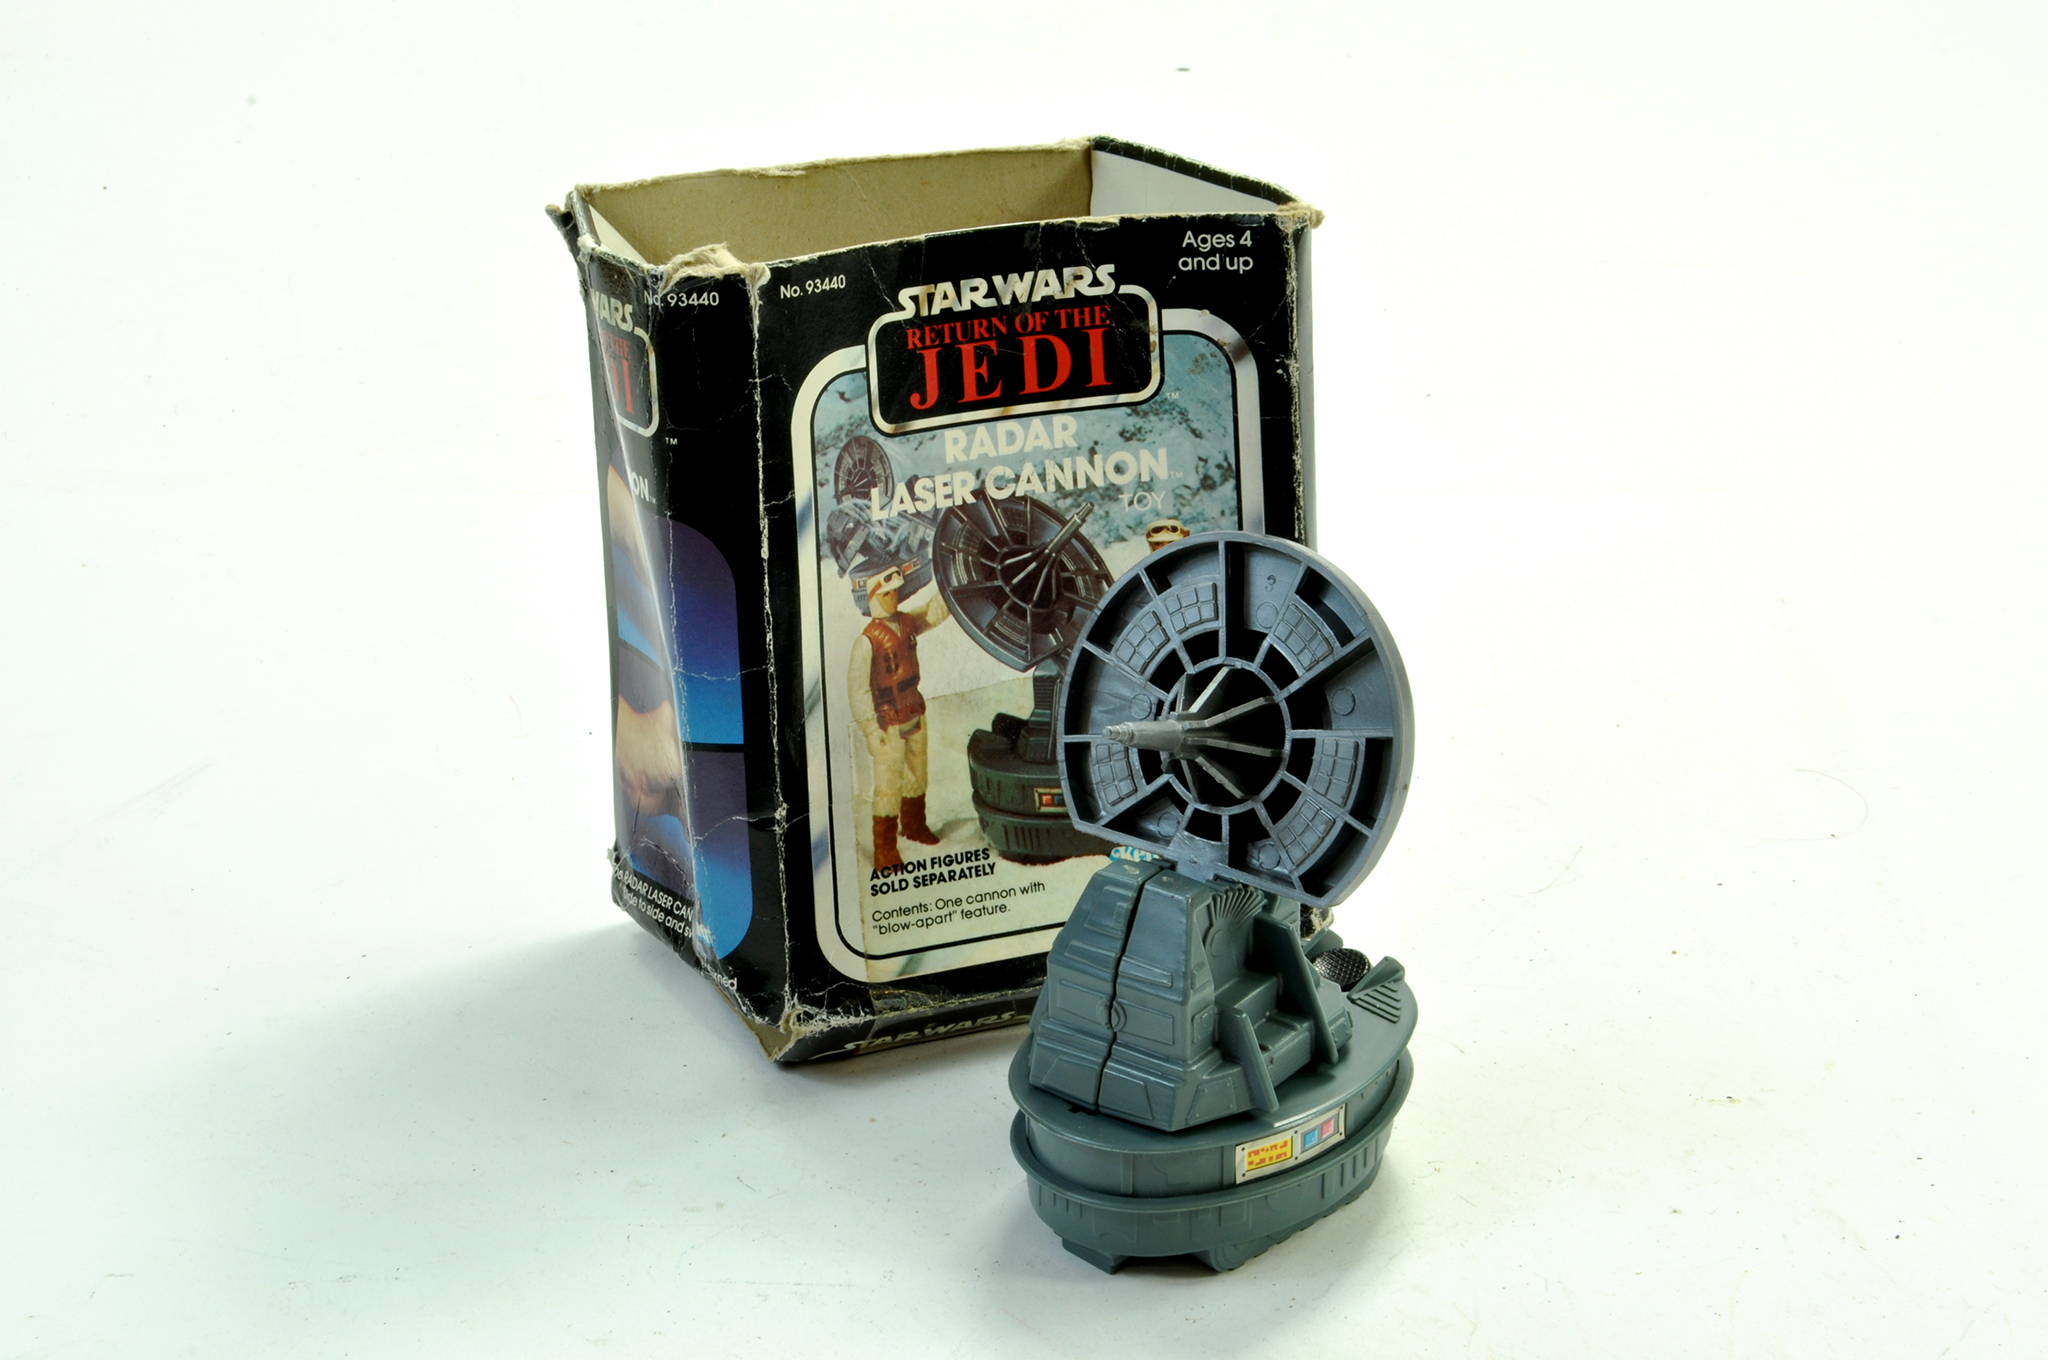 Palitoy General Mills Star Wars Return of the Jedi Radar Laser Cannon, just missing instructions.